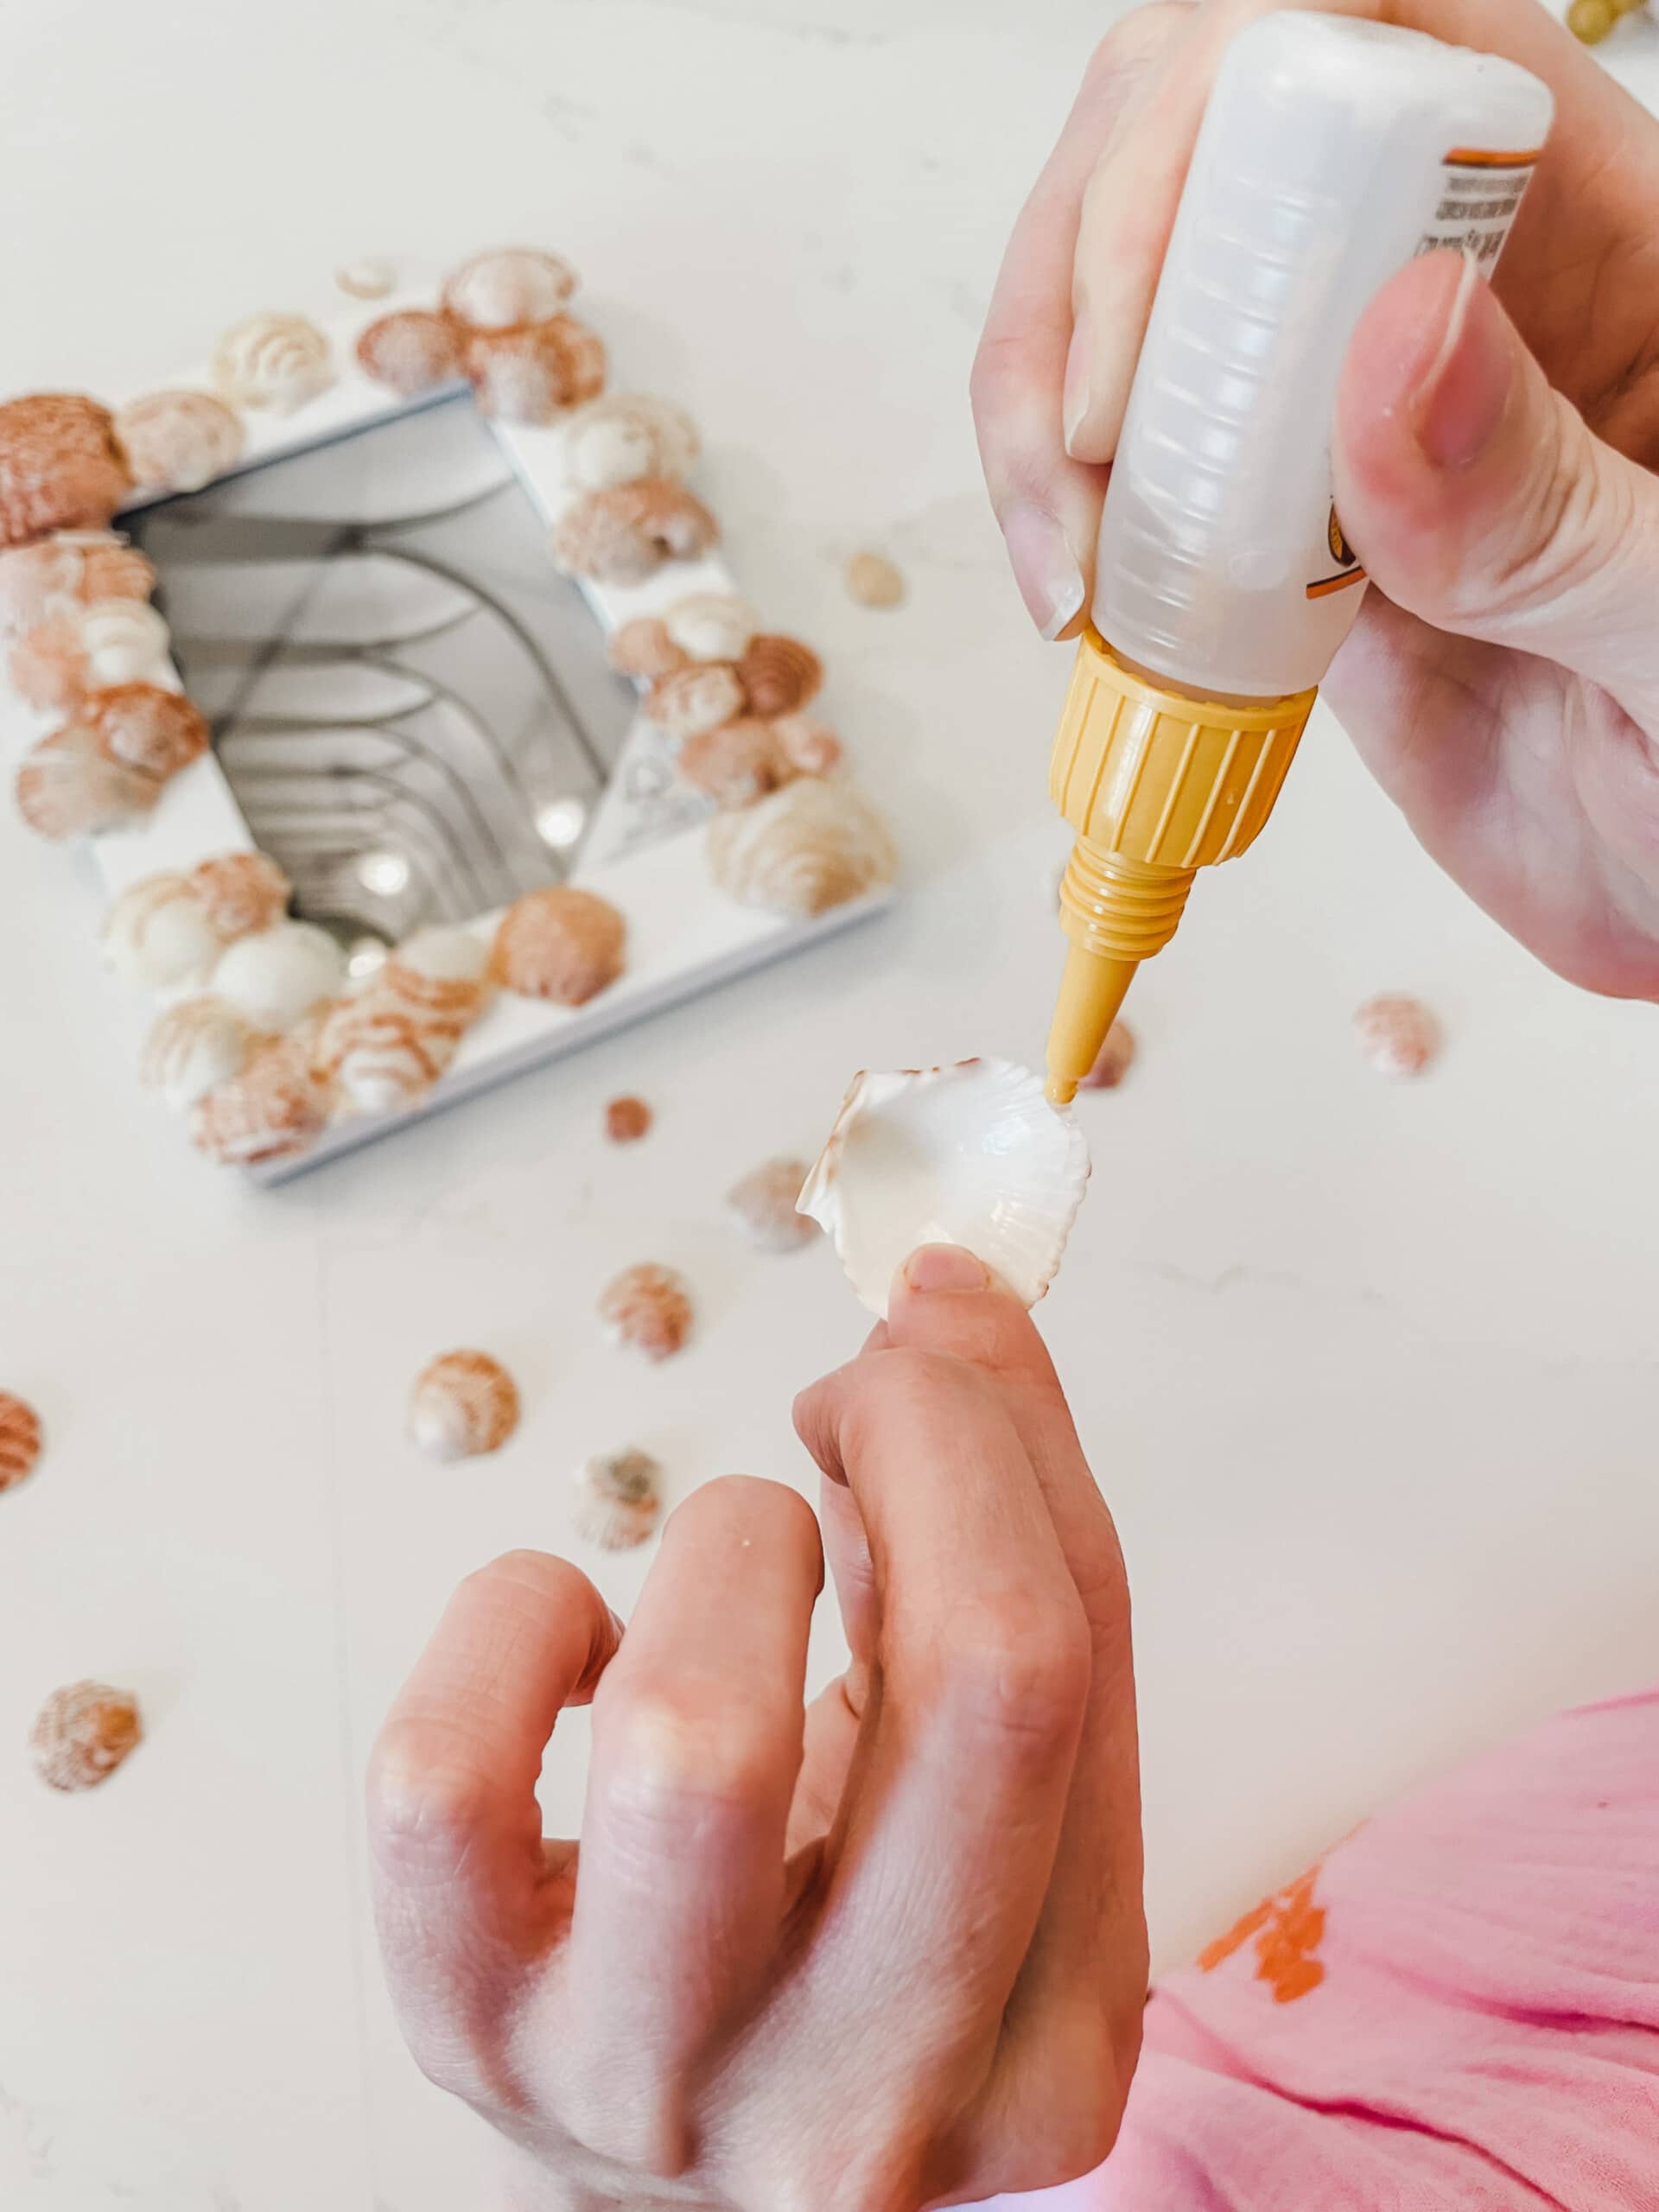 Woman's hands adding glue on edges of a seashell.